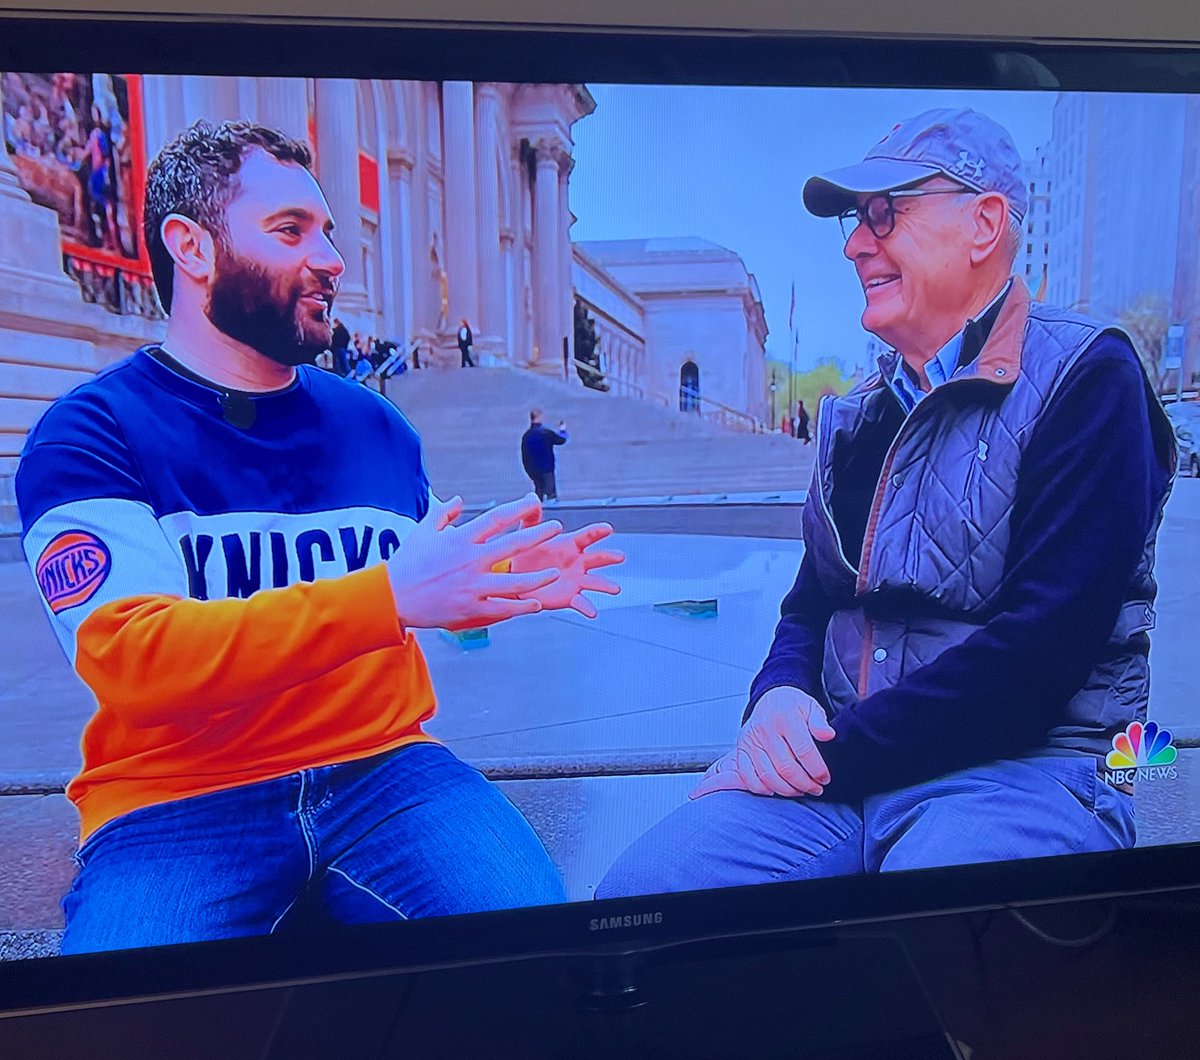 Did a thing the other day that aired tonight. Thanks @mickifahner, @HarrySmith, and the whole @NBCNightlyNews crew for making it happen! nbcnews.com/nightly-news/v…